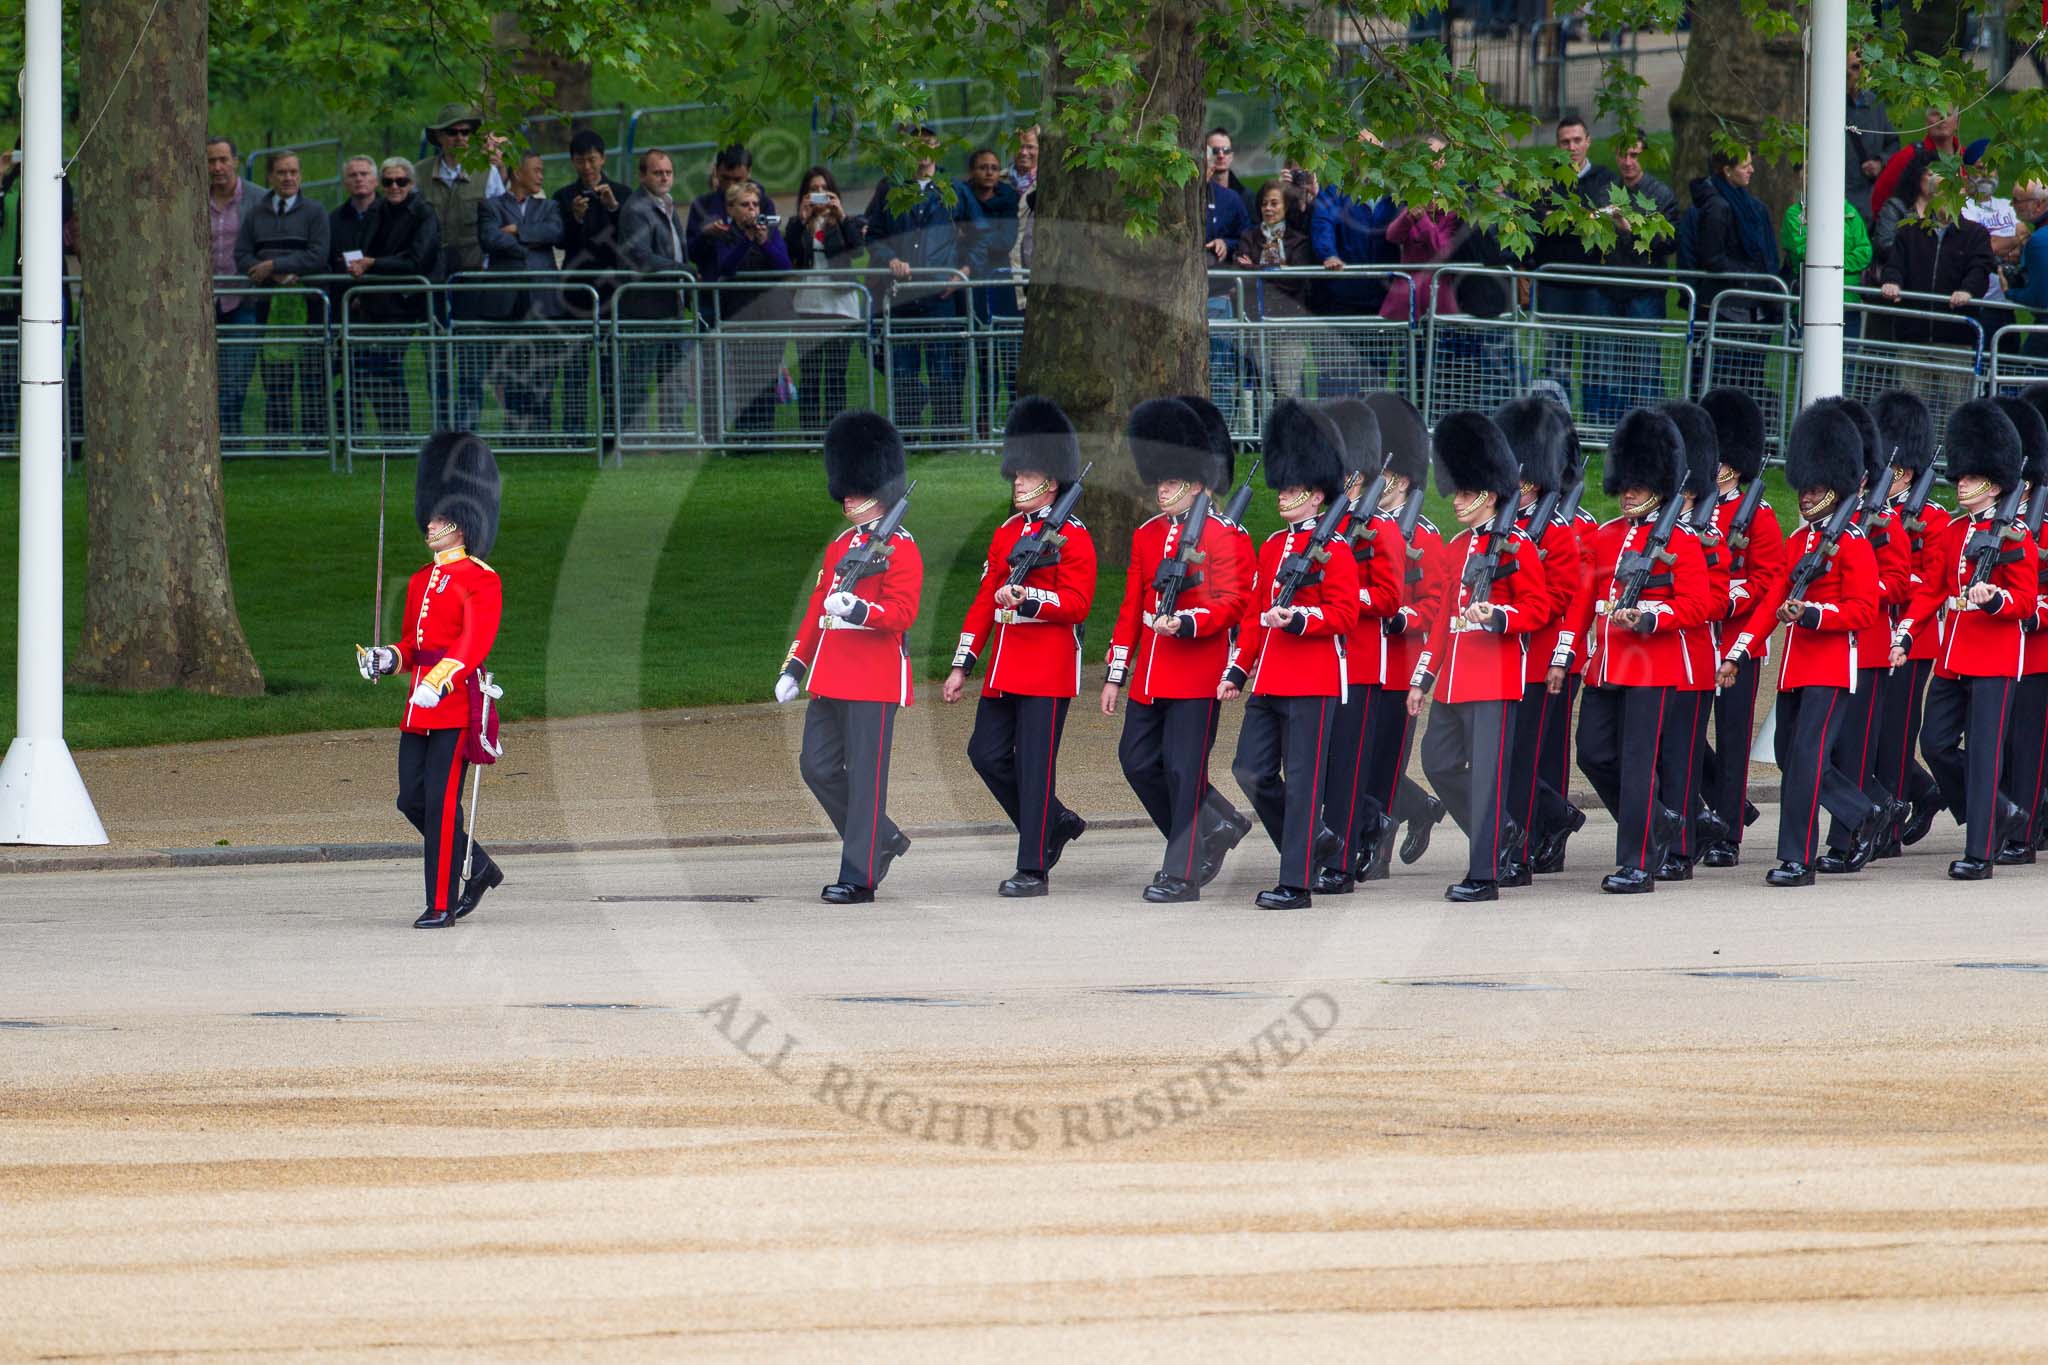 Major General's Review 2013: No. 5 Guard, F Company Scots Guards, is marching to their position on Horse Guards Parade..
Horse Guards Parade, Westminster,
London SW1,

United Kingdom,
on 01 June 2013 at 10:23, image #76